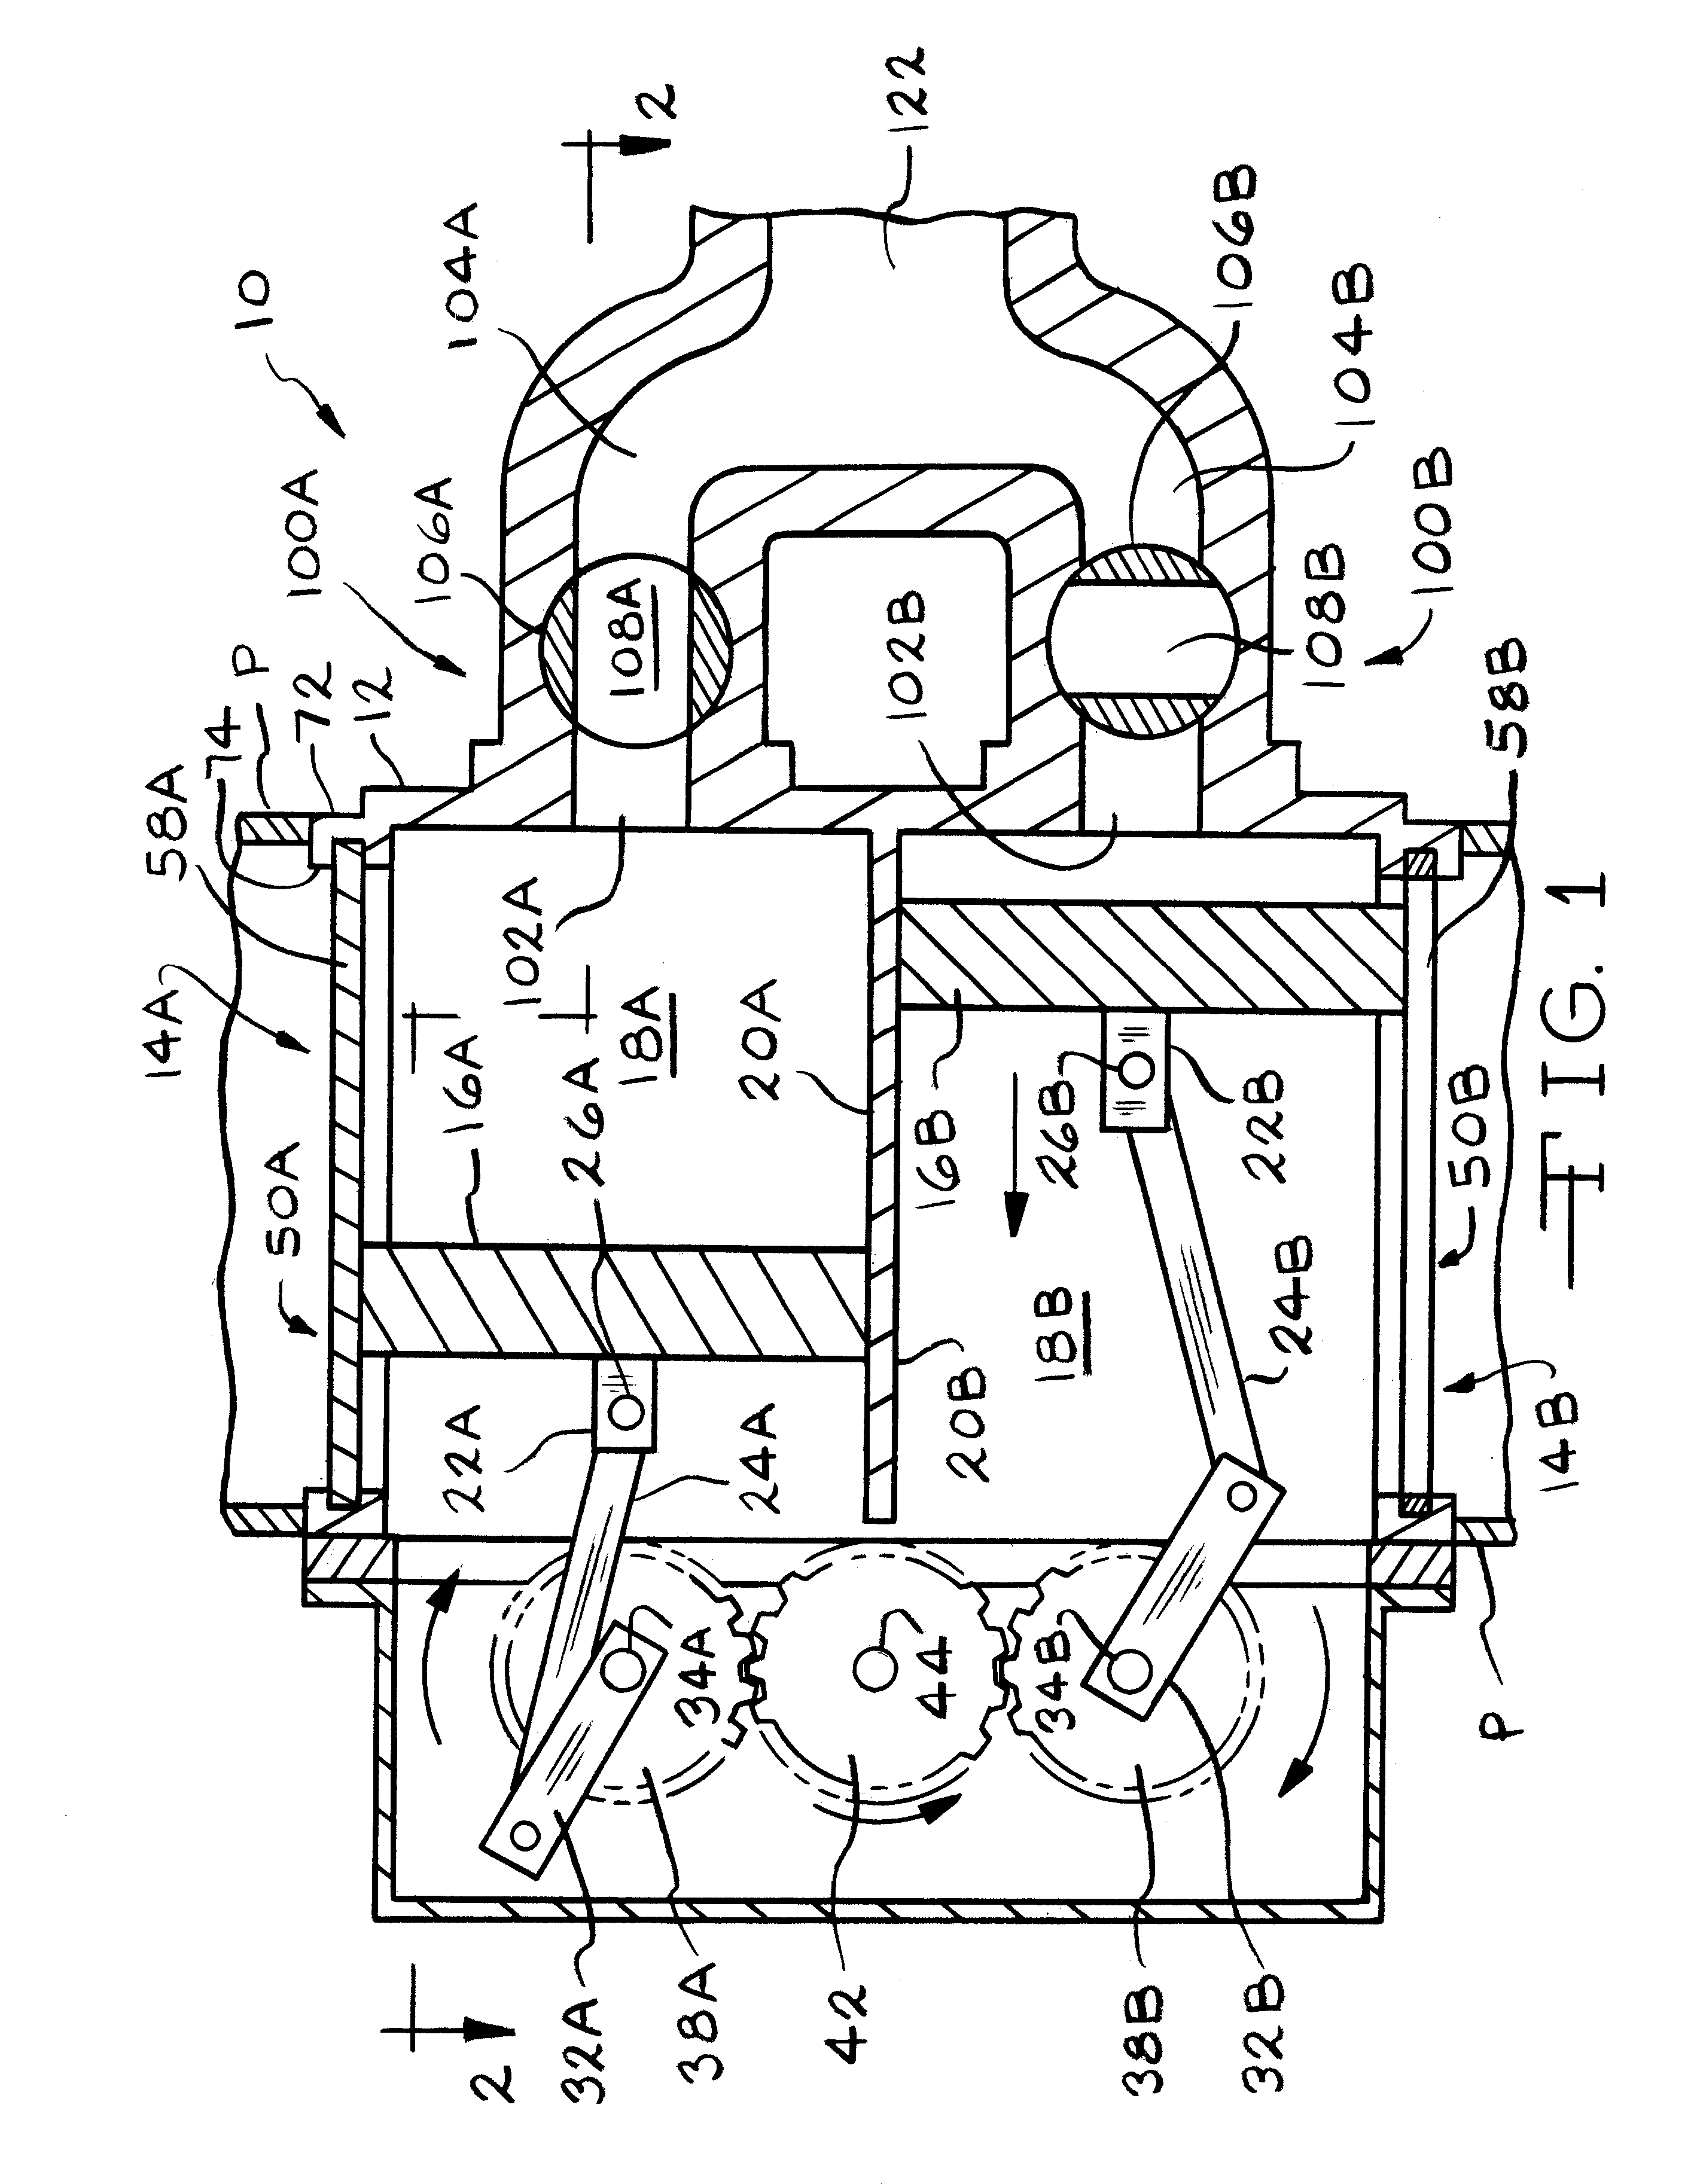 Controllable high volume positive displacement pump